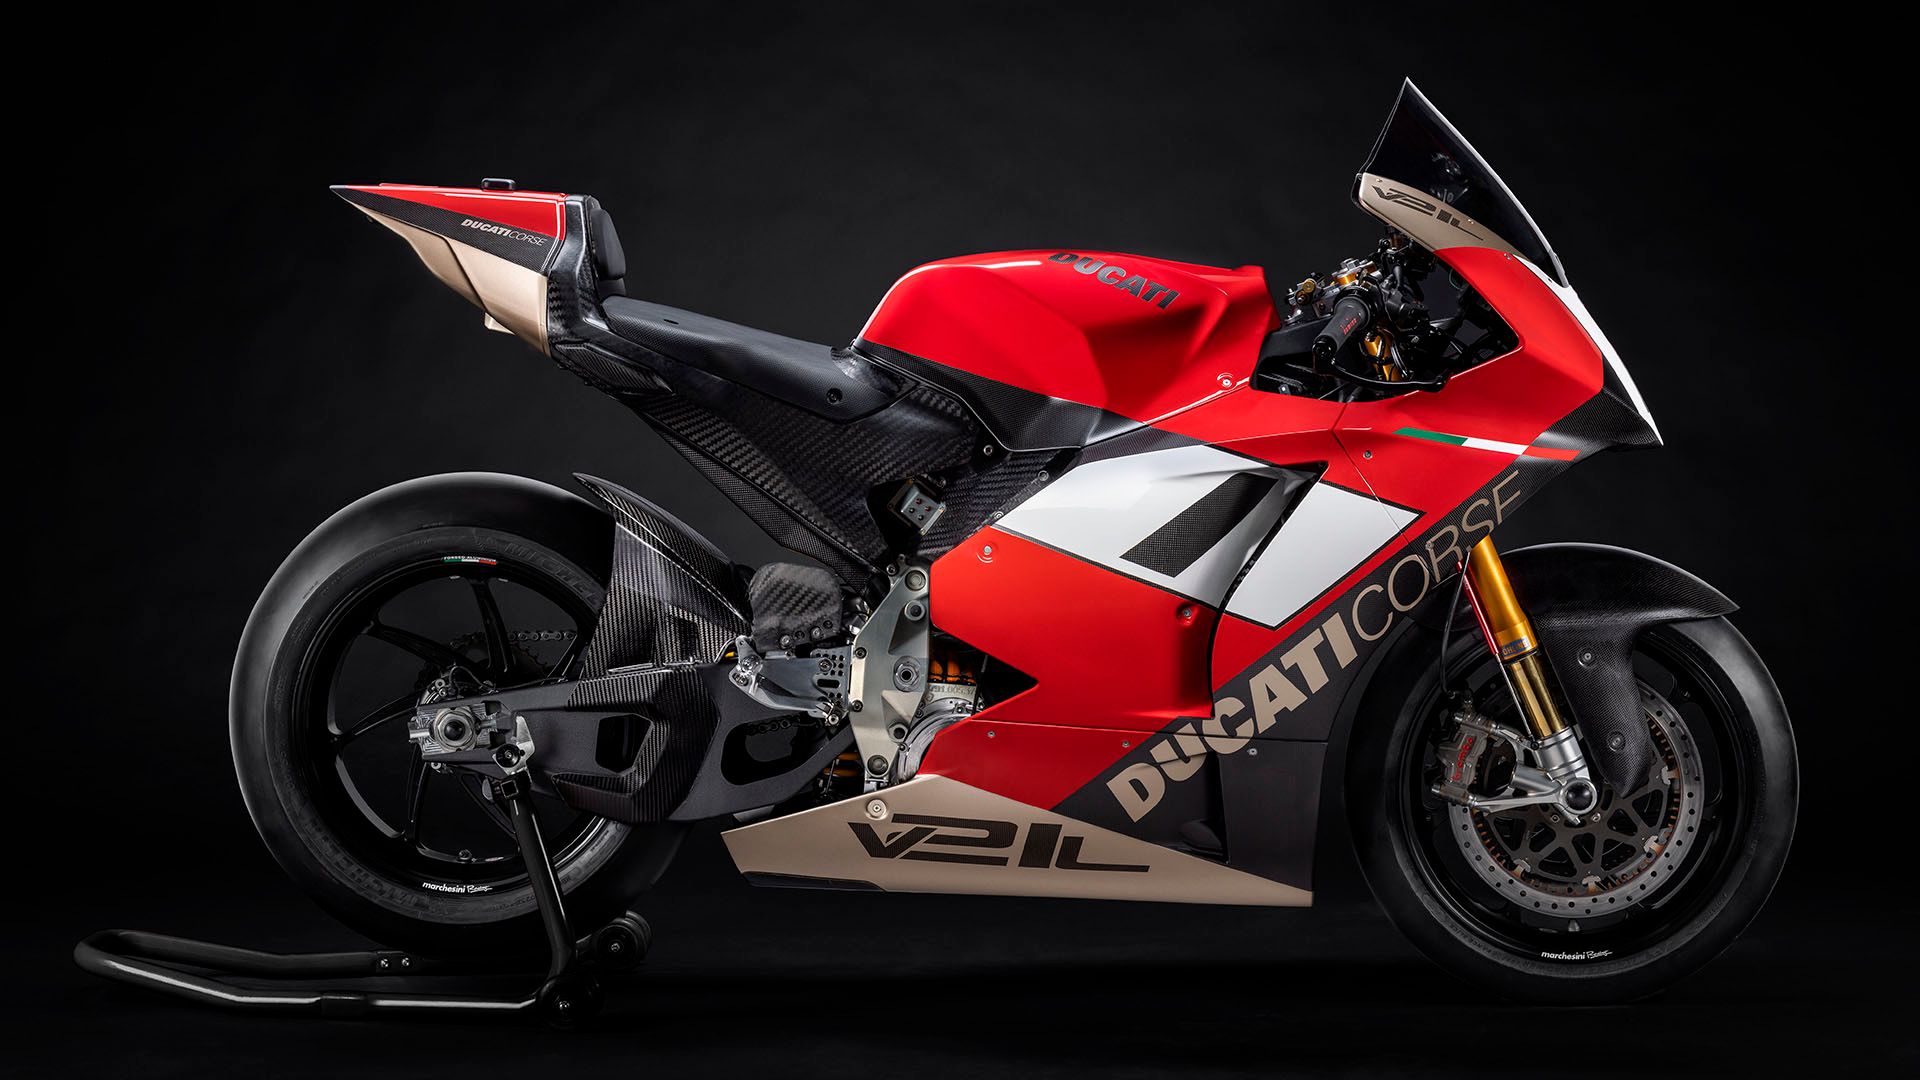 Ducati's First Electric Motorcycle Can Reach Over 170 MPH at Full